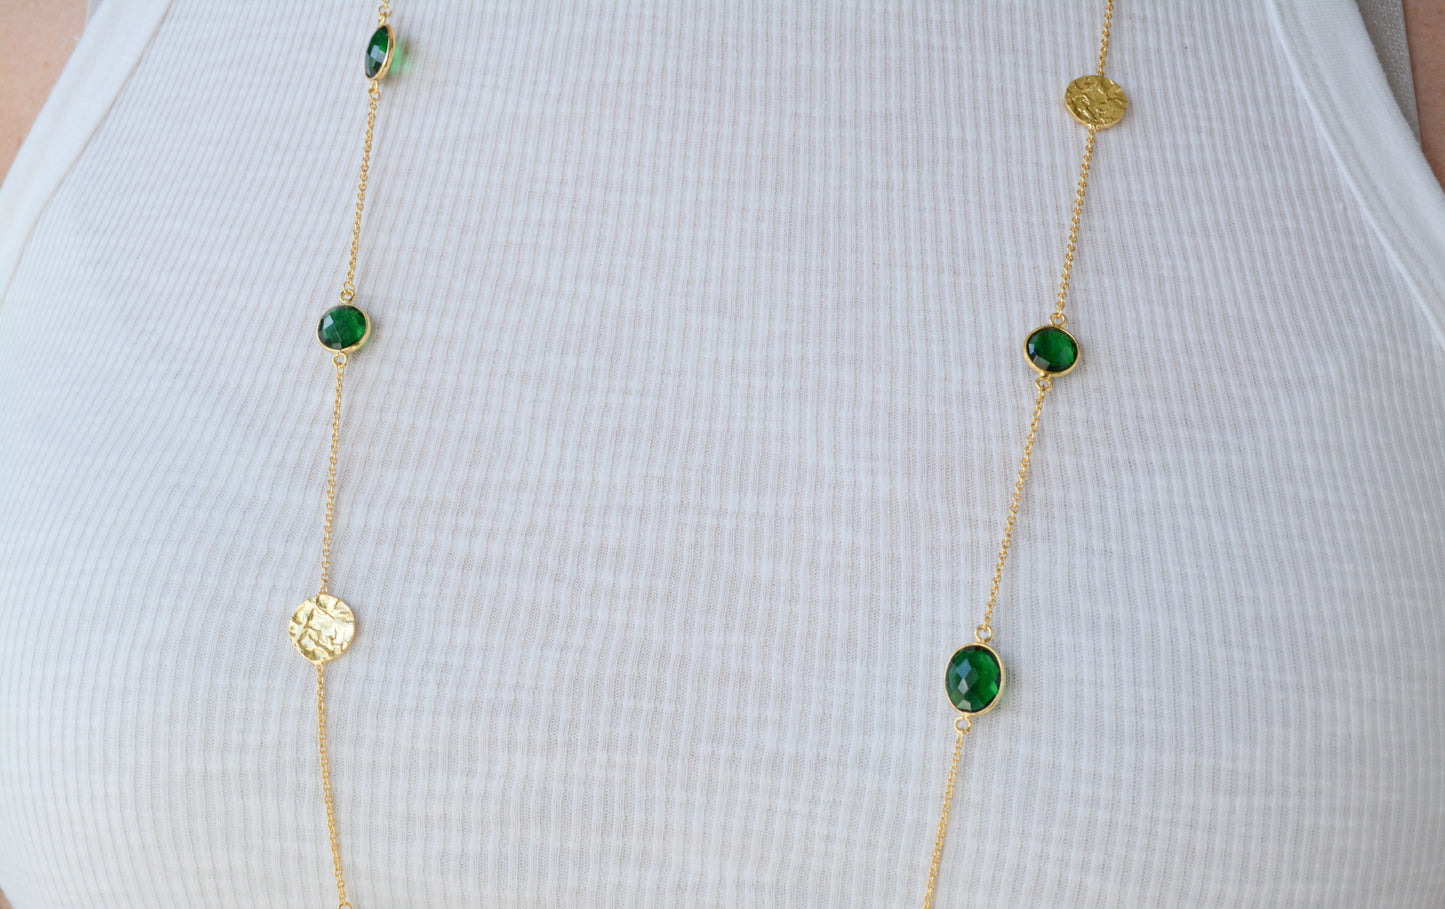 Green Tourmaline necklace with hammered disc accents